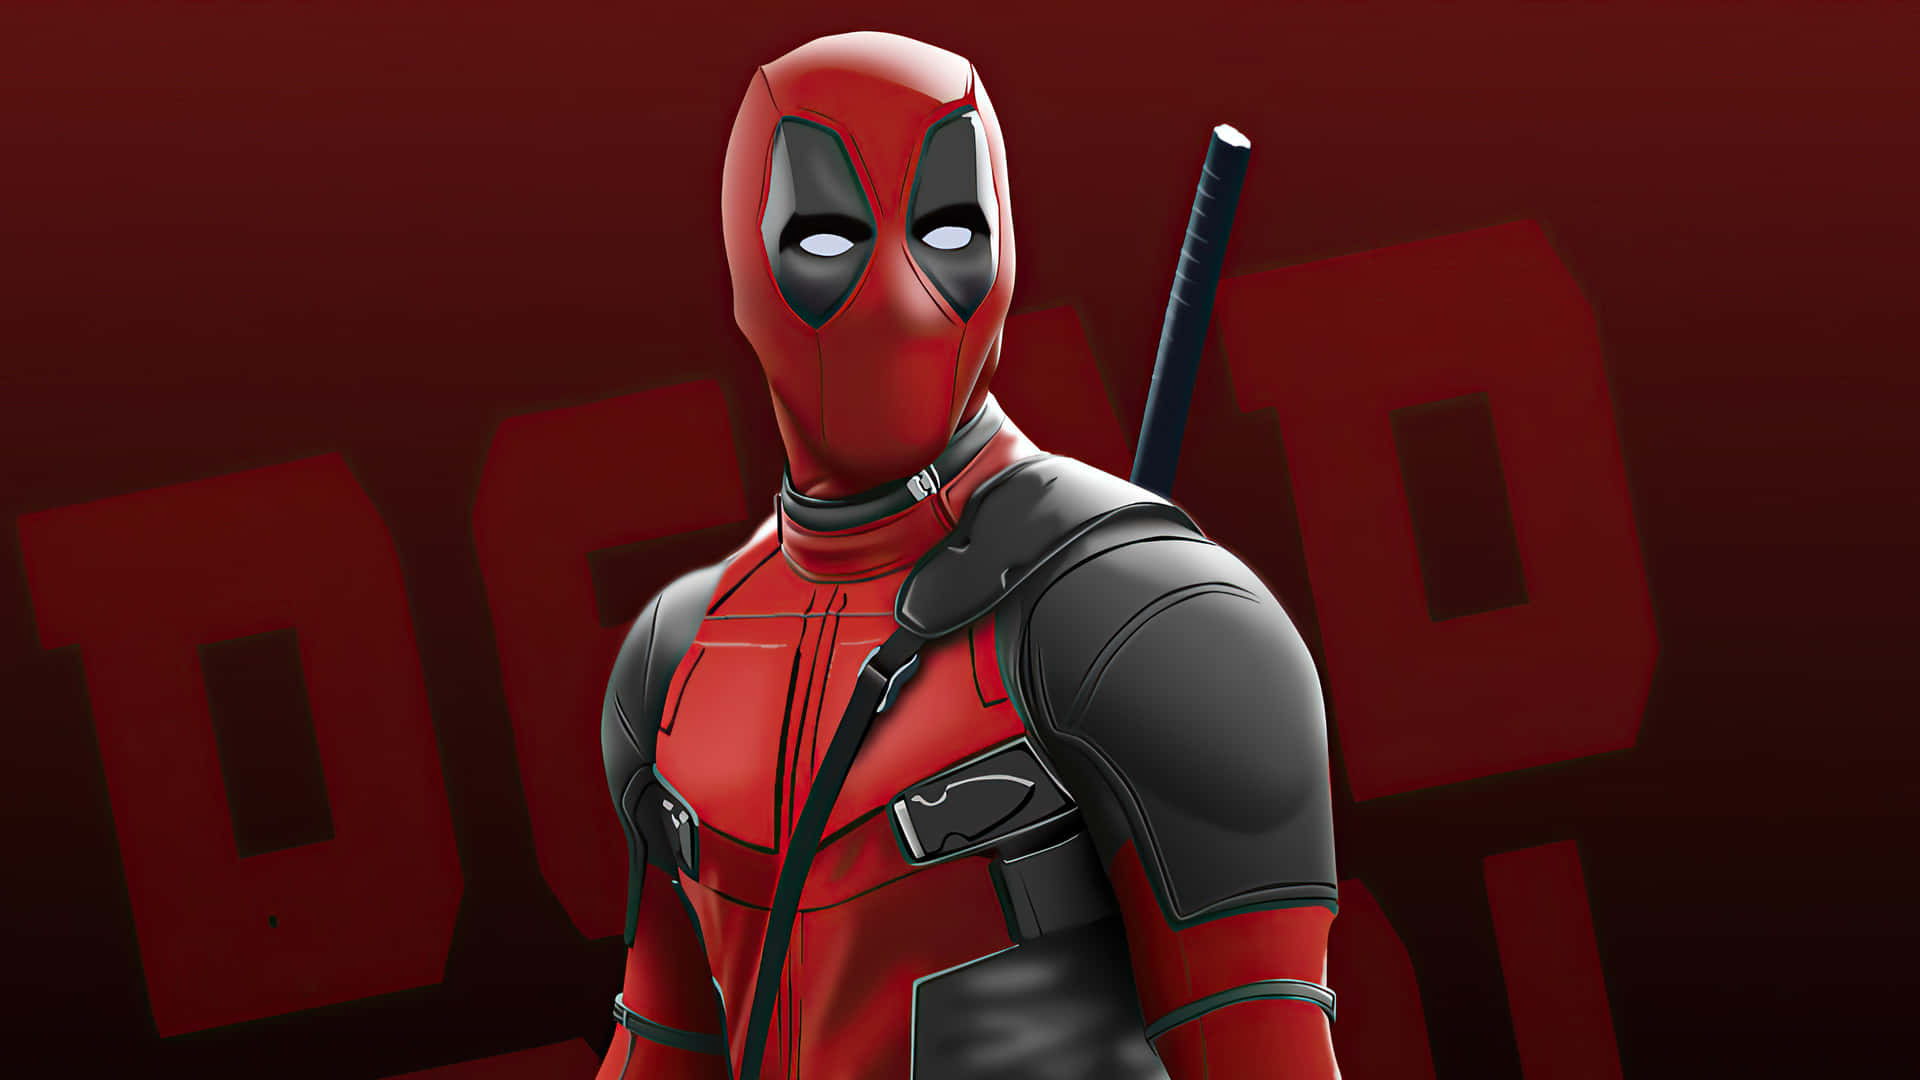 Red Minimalistic Deadpool Background With His Hero Name